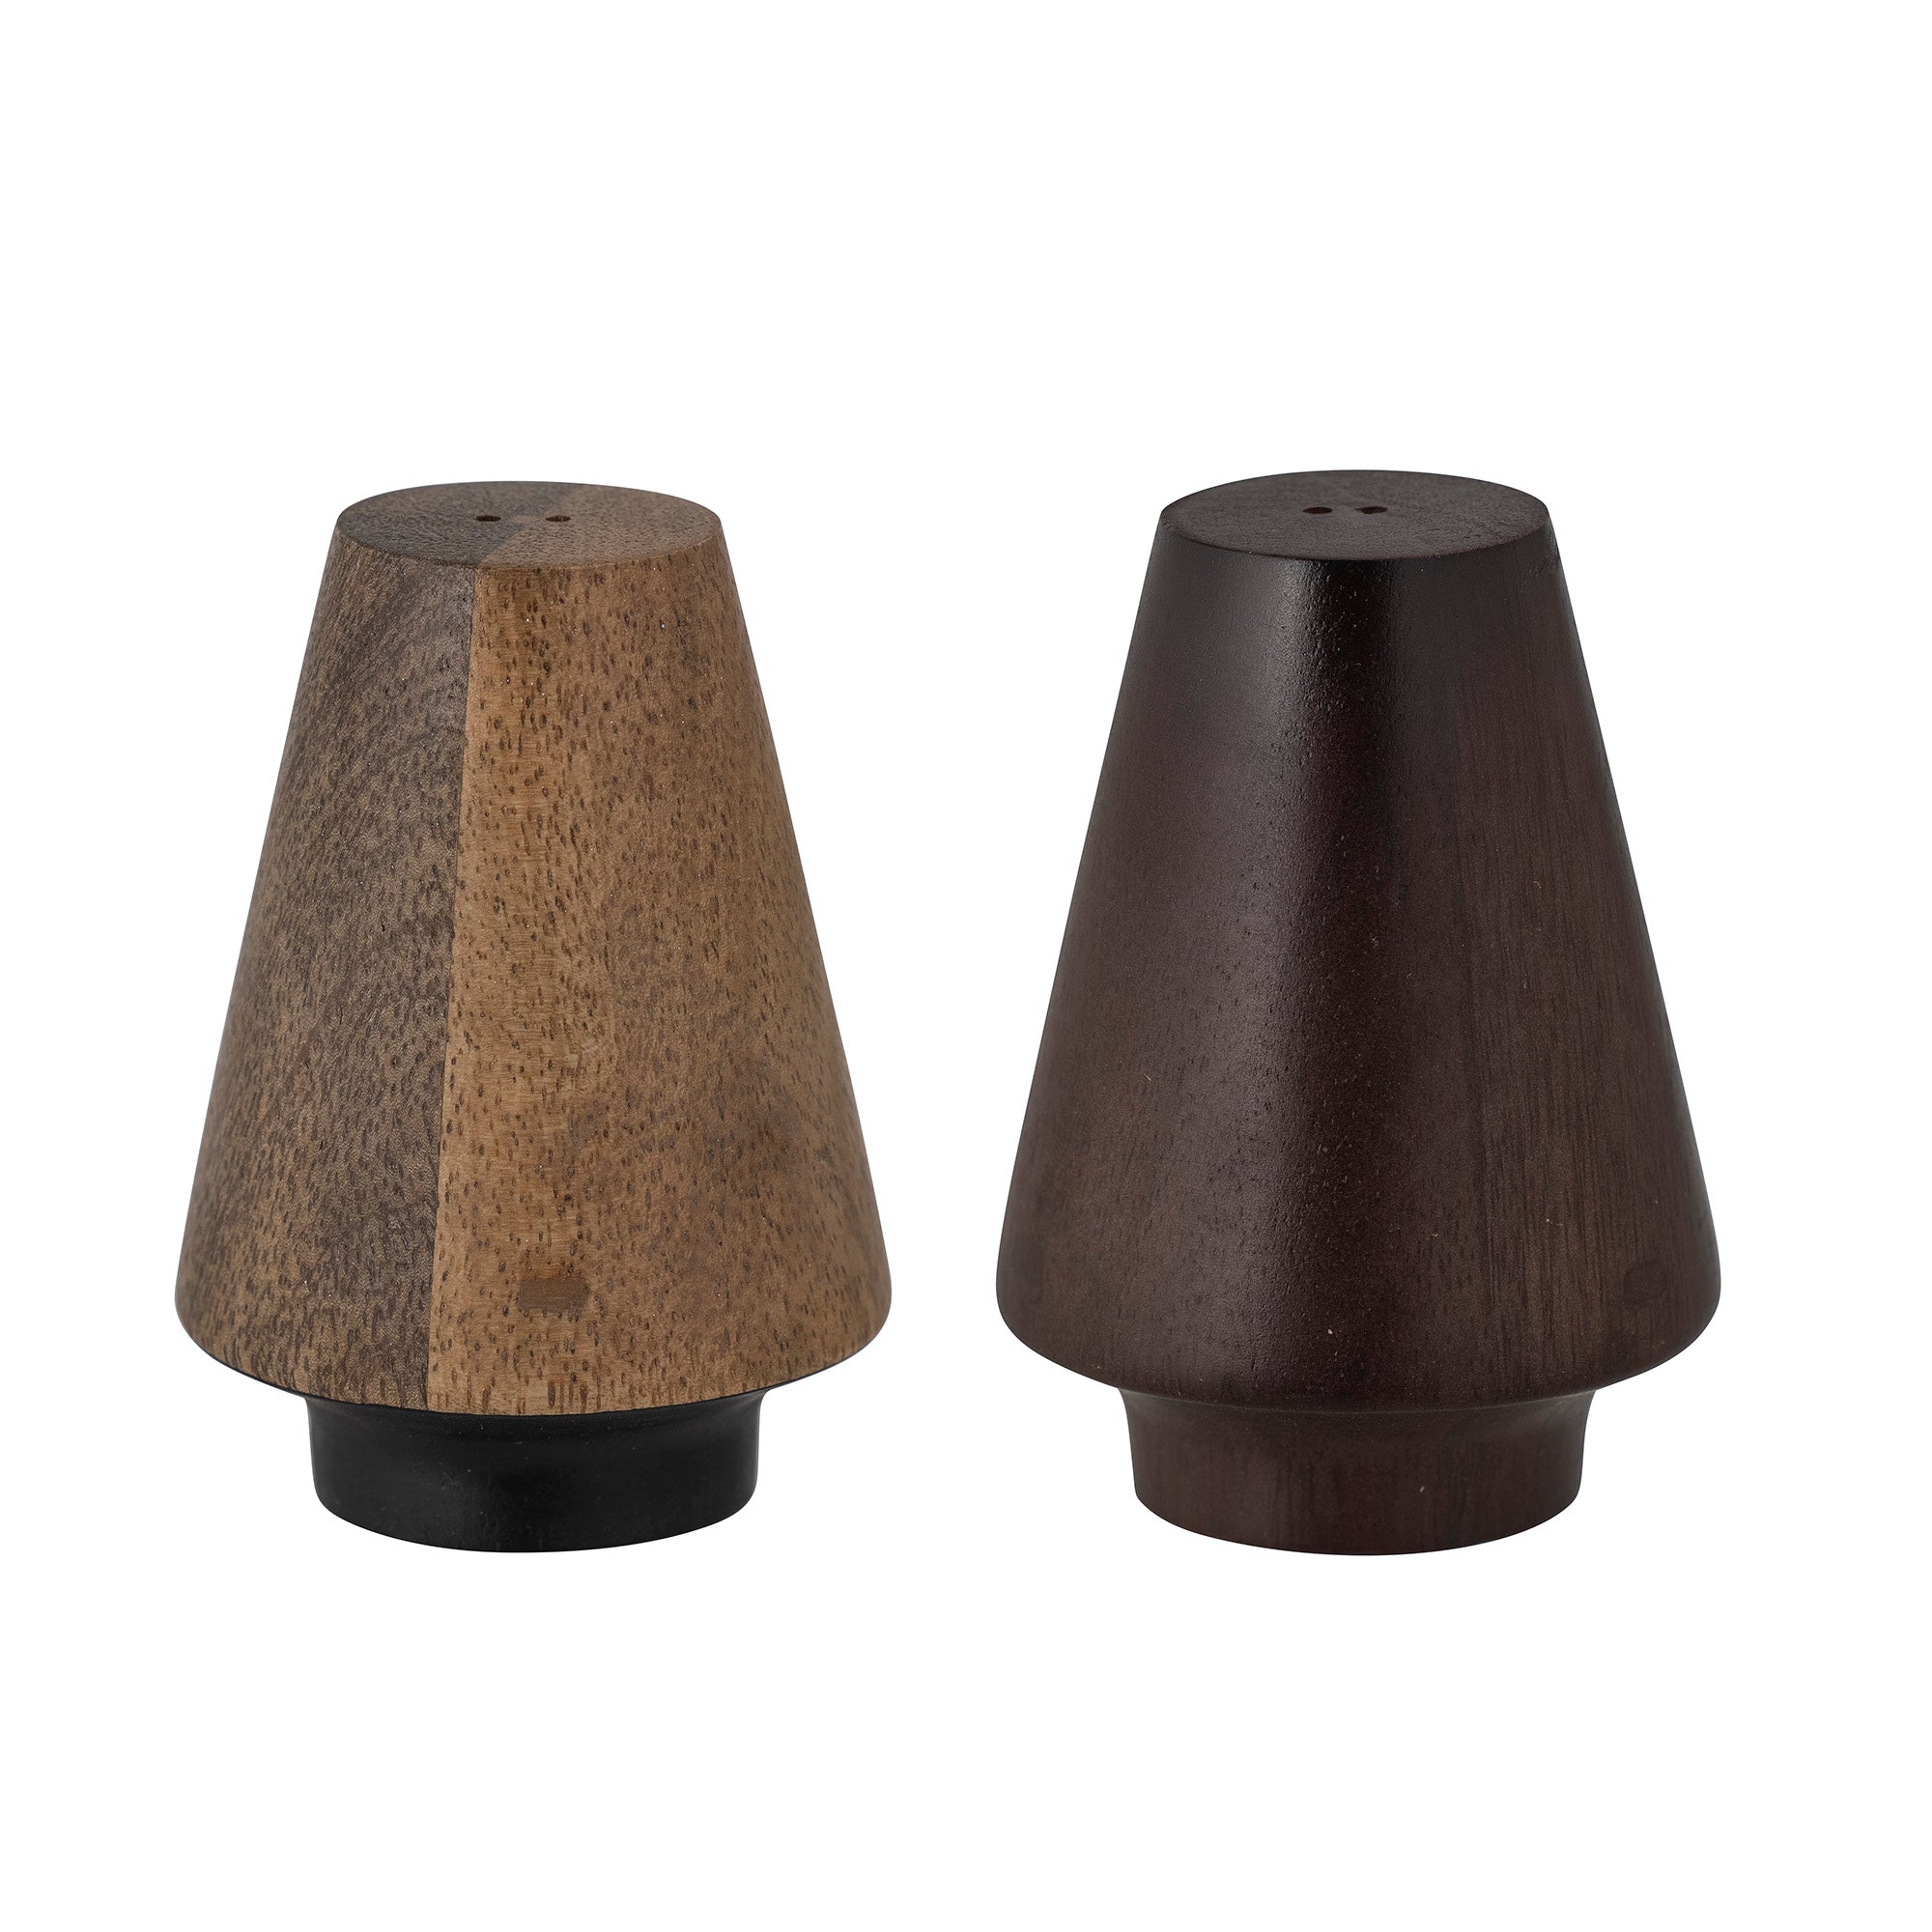 Daili is a modern set of pepper and salt shaker that will help you serve your favorite dishes. It was made of mango wood in two different colors, which ensures a beautiful contrast in the dining room with Scandinavian decor. The use of the plug from below allows easy and quick supplemented.